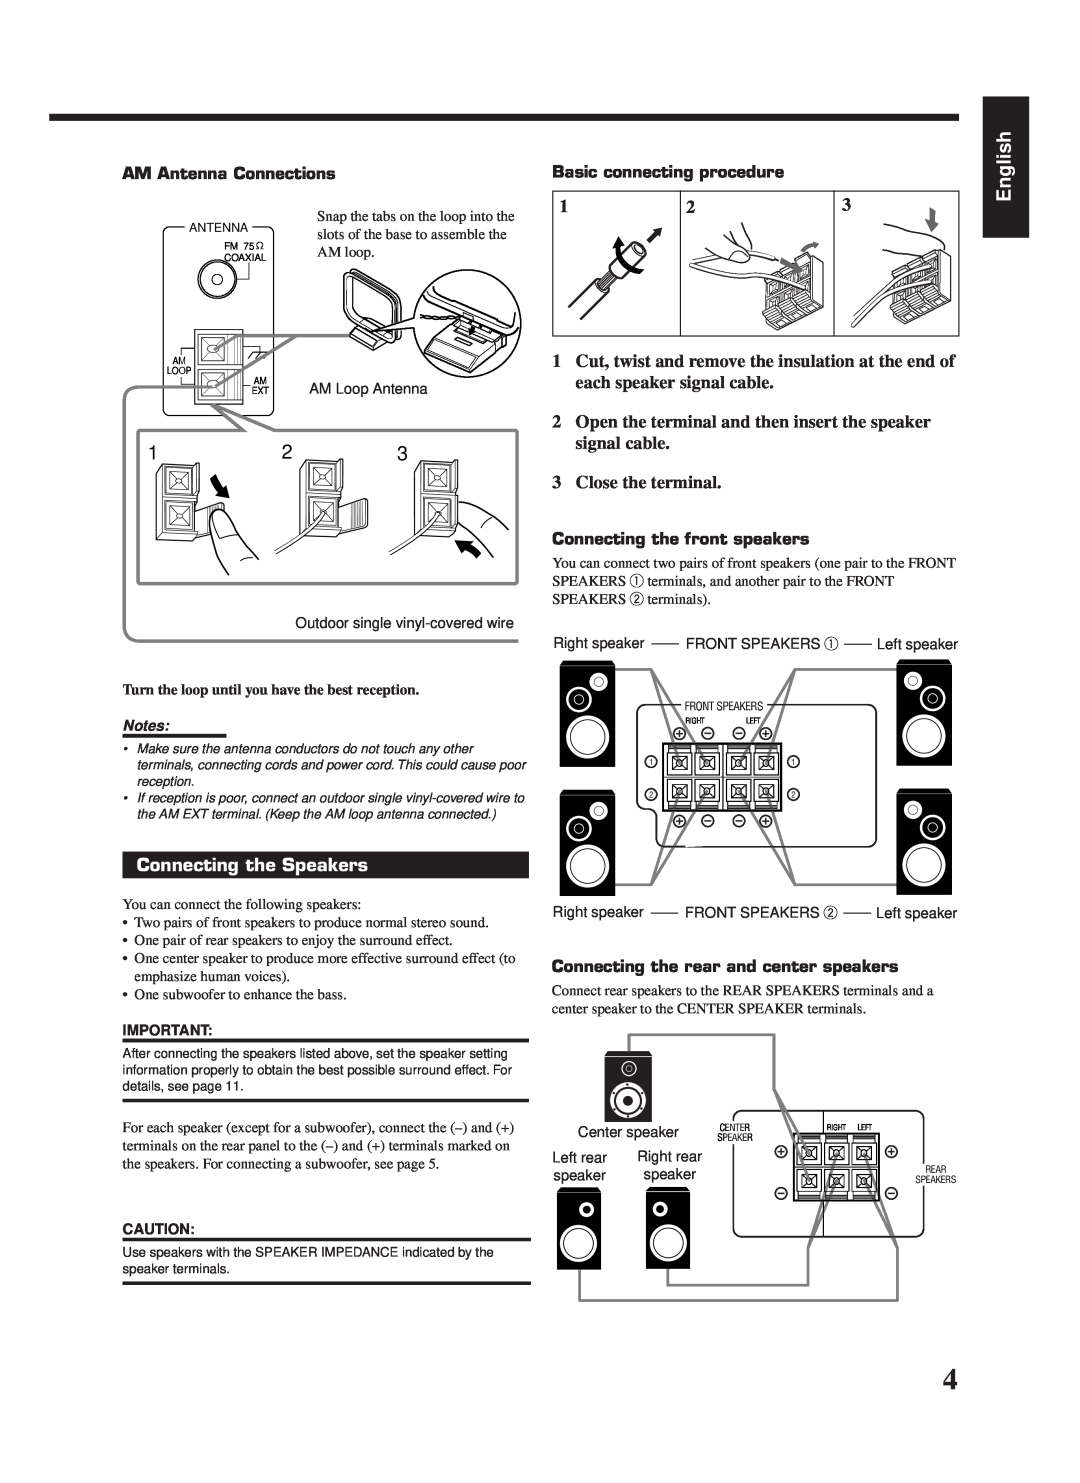 JVC RX-669PGD, LVT0142-006A manual English, Connecting the Speakers, AM Antenna Connections, Basic connecting procedure 